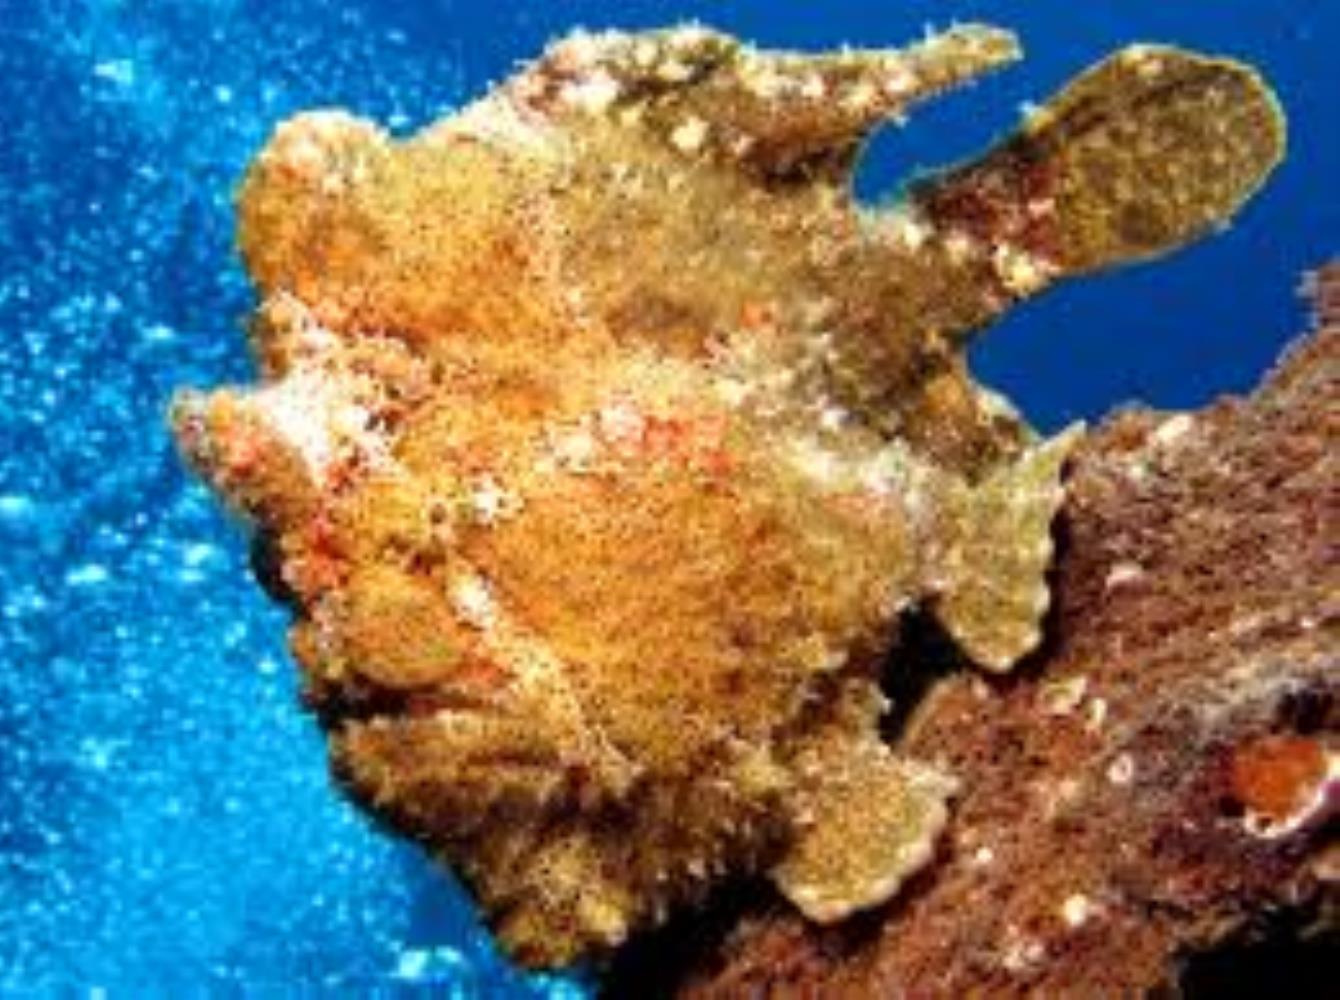 Giant/Commerson's Frogfish